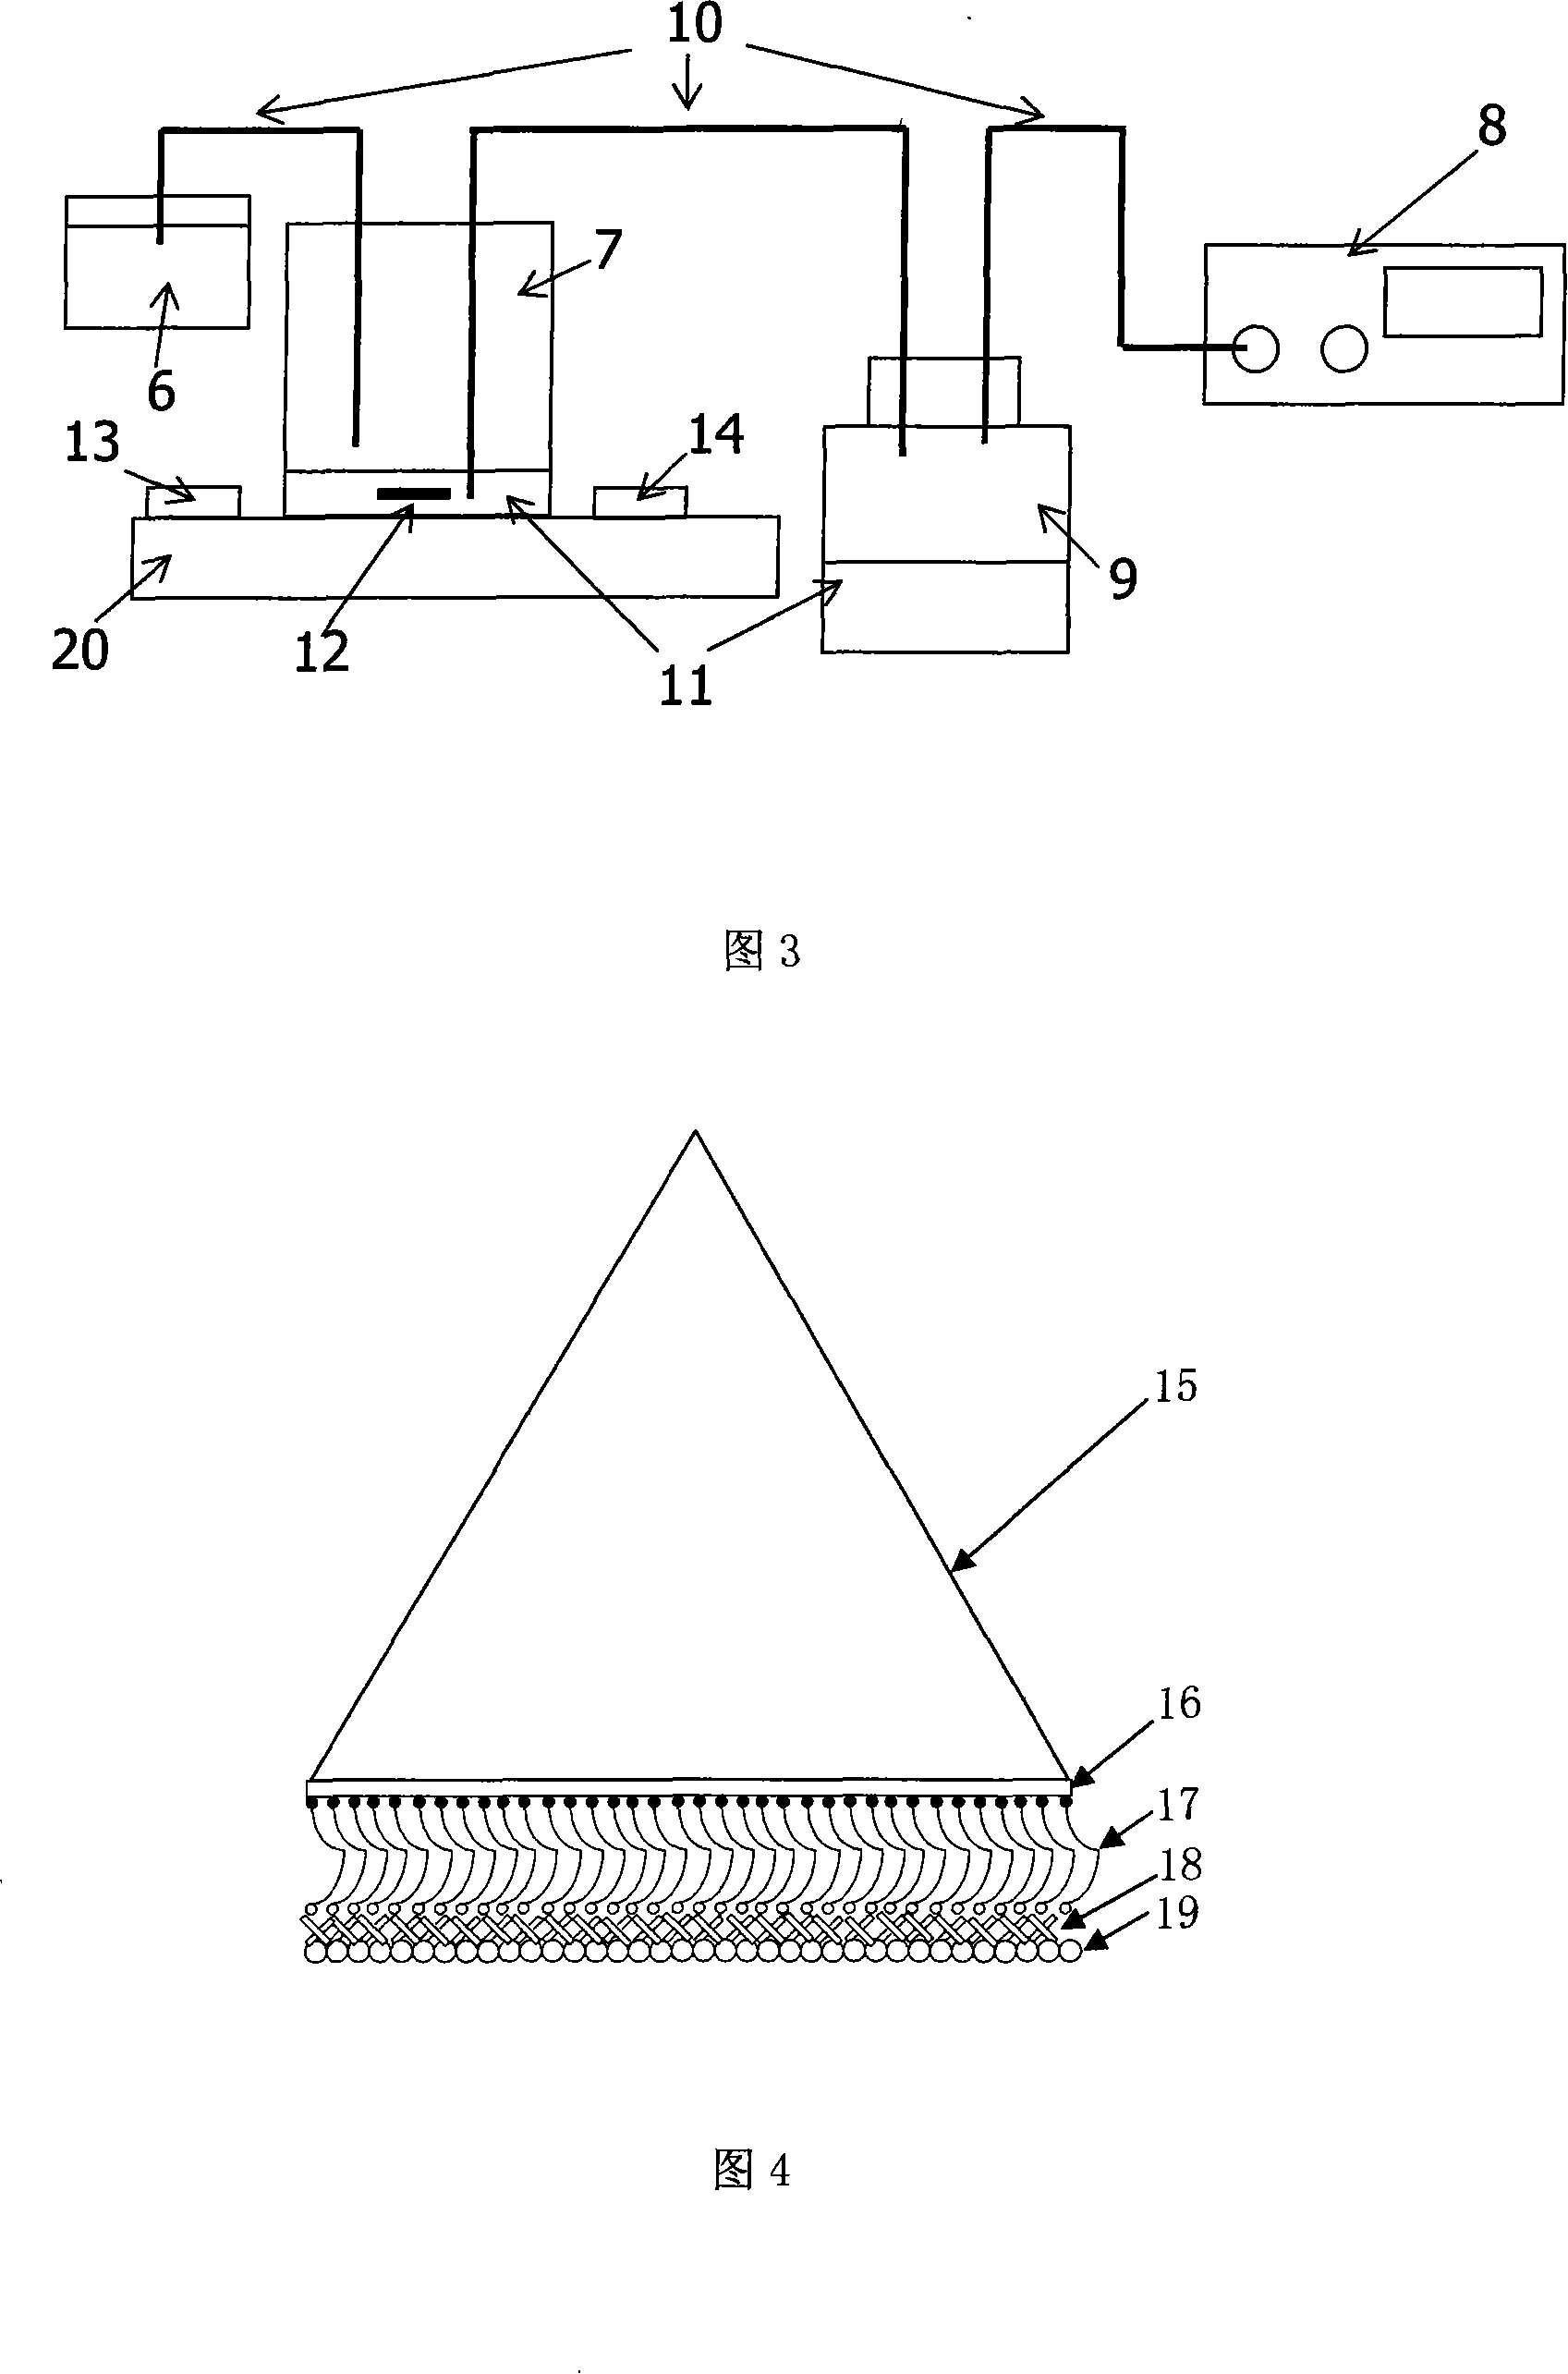 Method for micro-wounded dynamically and continuously detecting blood sugar concentration of human body